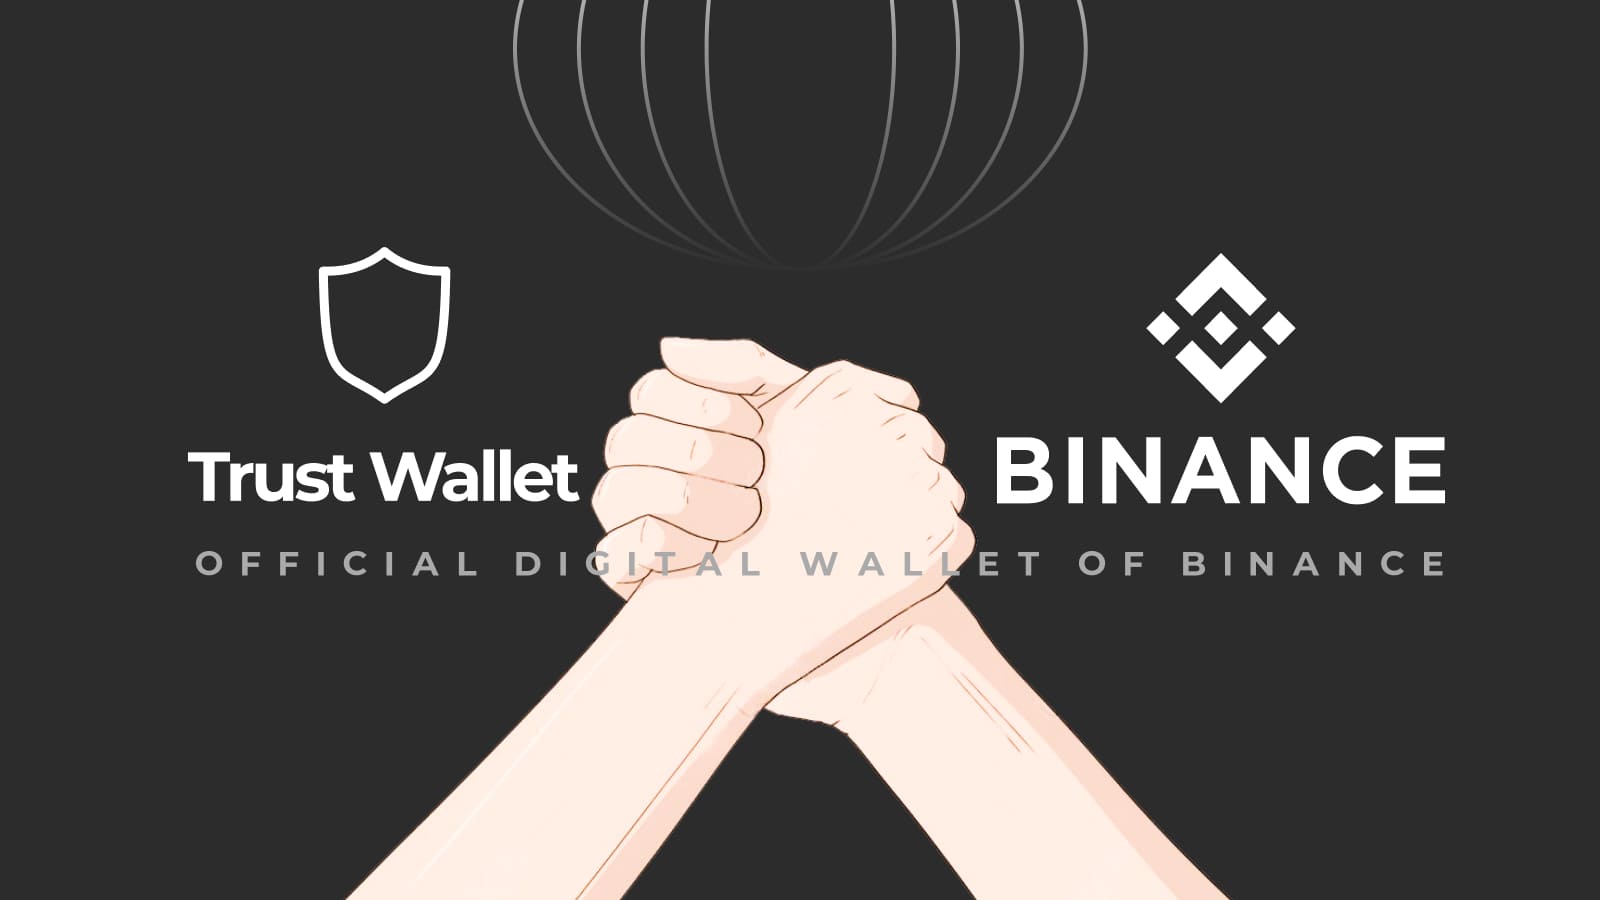 Trust Wallet is the official cryptocurrency wallet of Binance.